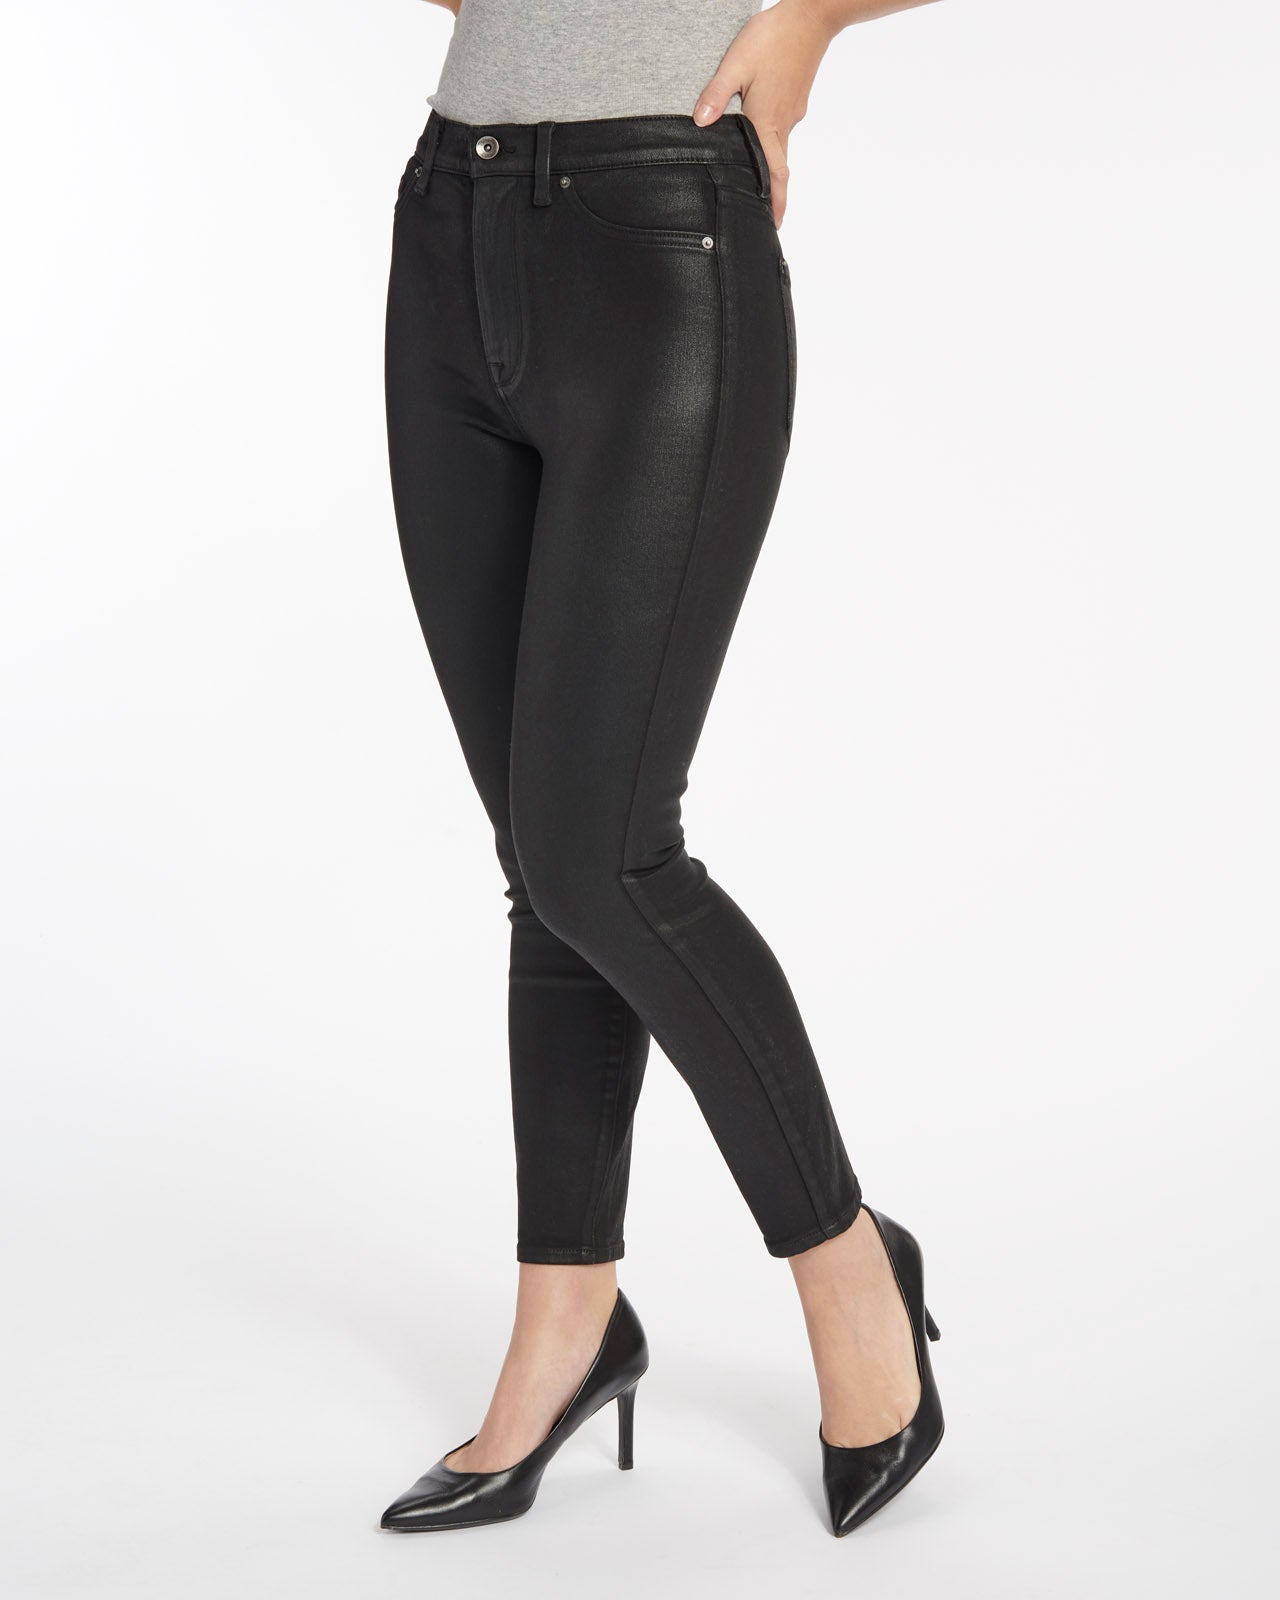 SALE: Black Coated Skinny Trousers, ONLY